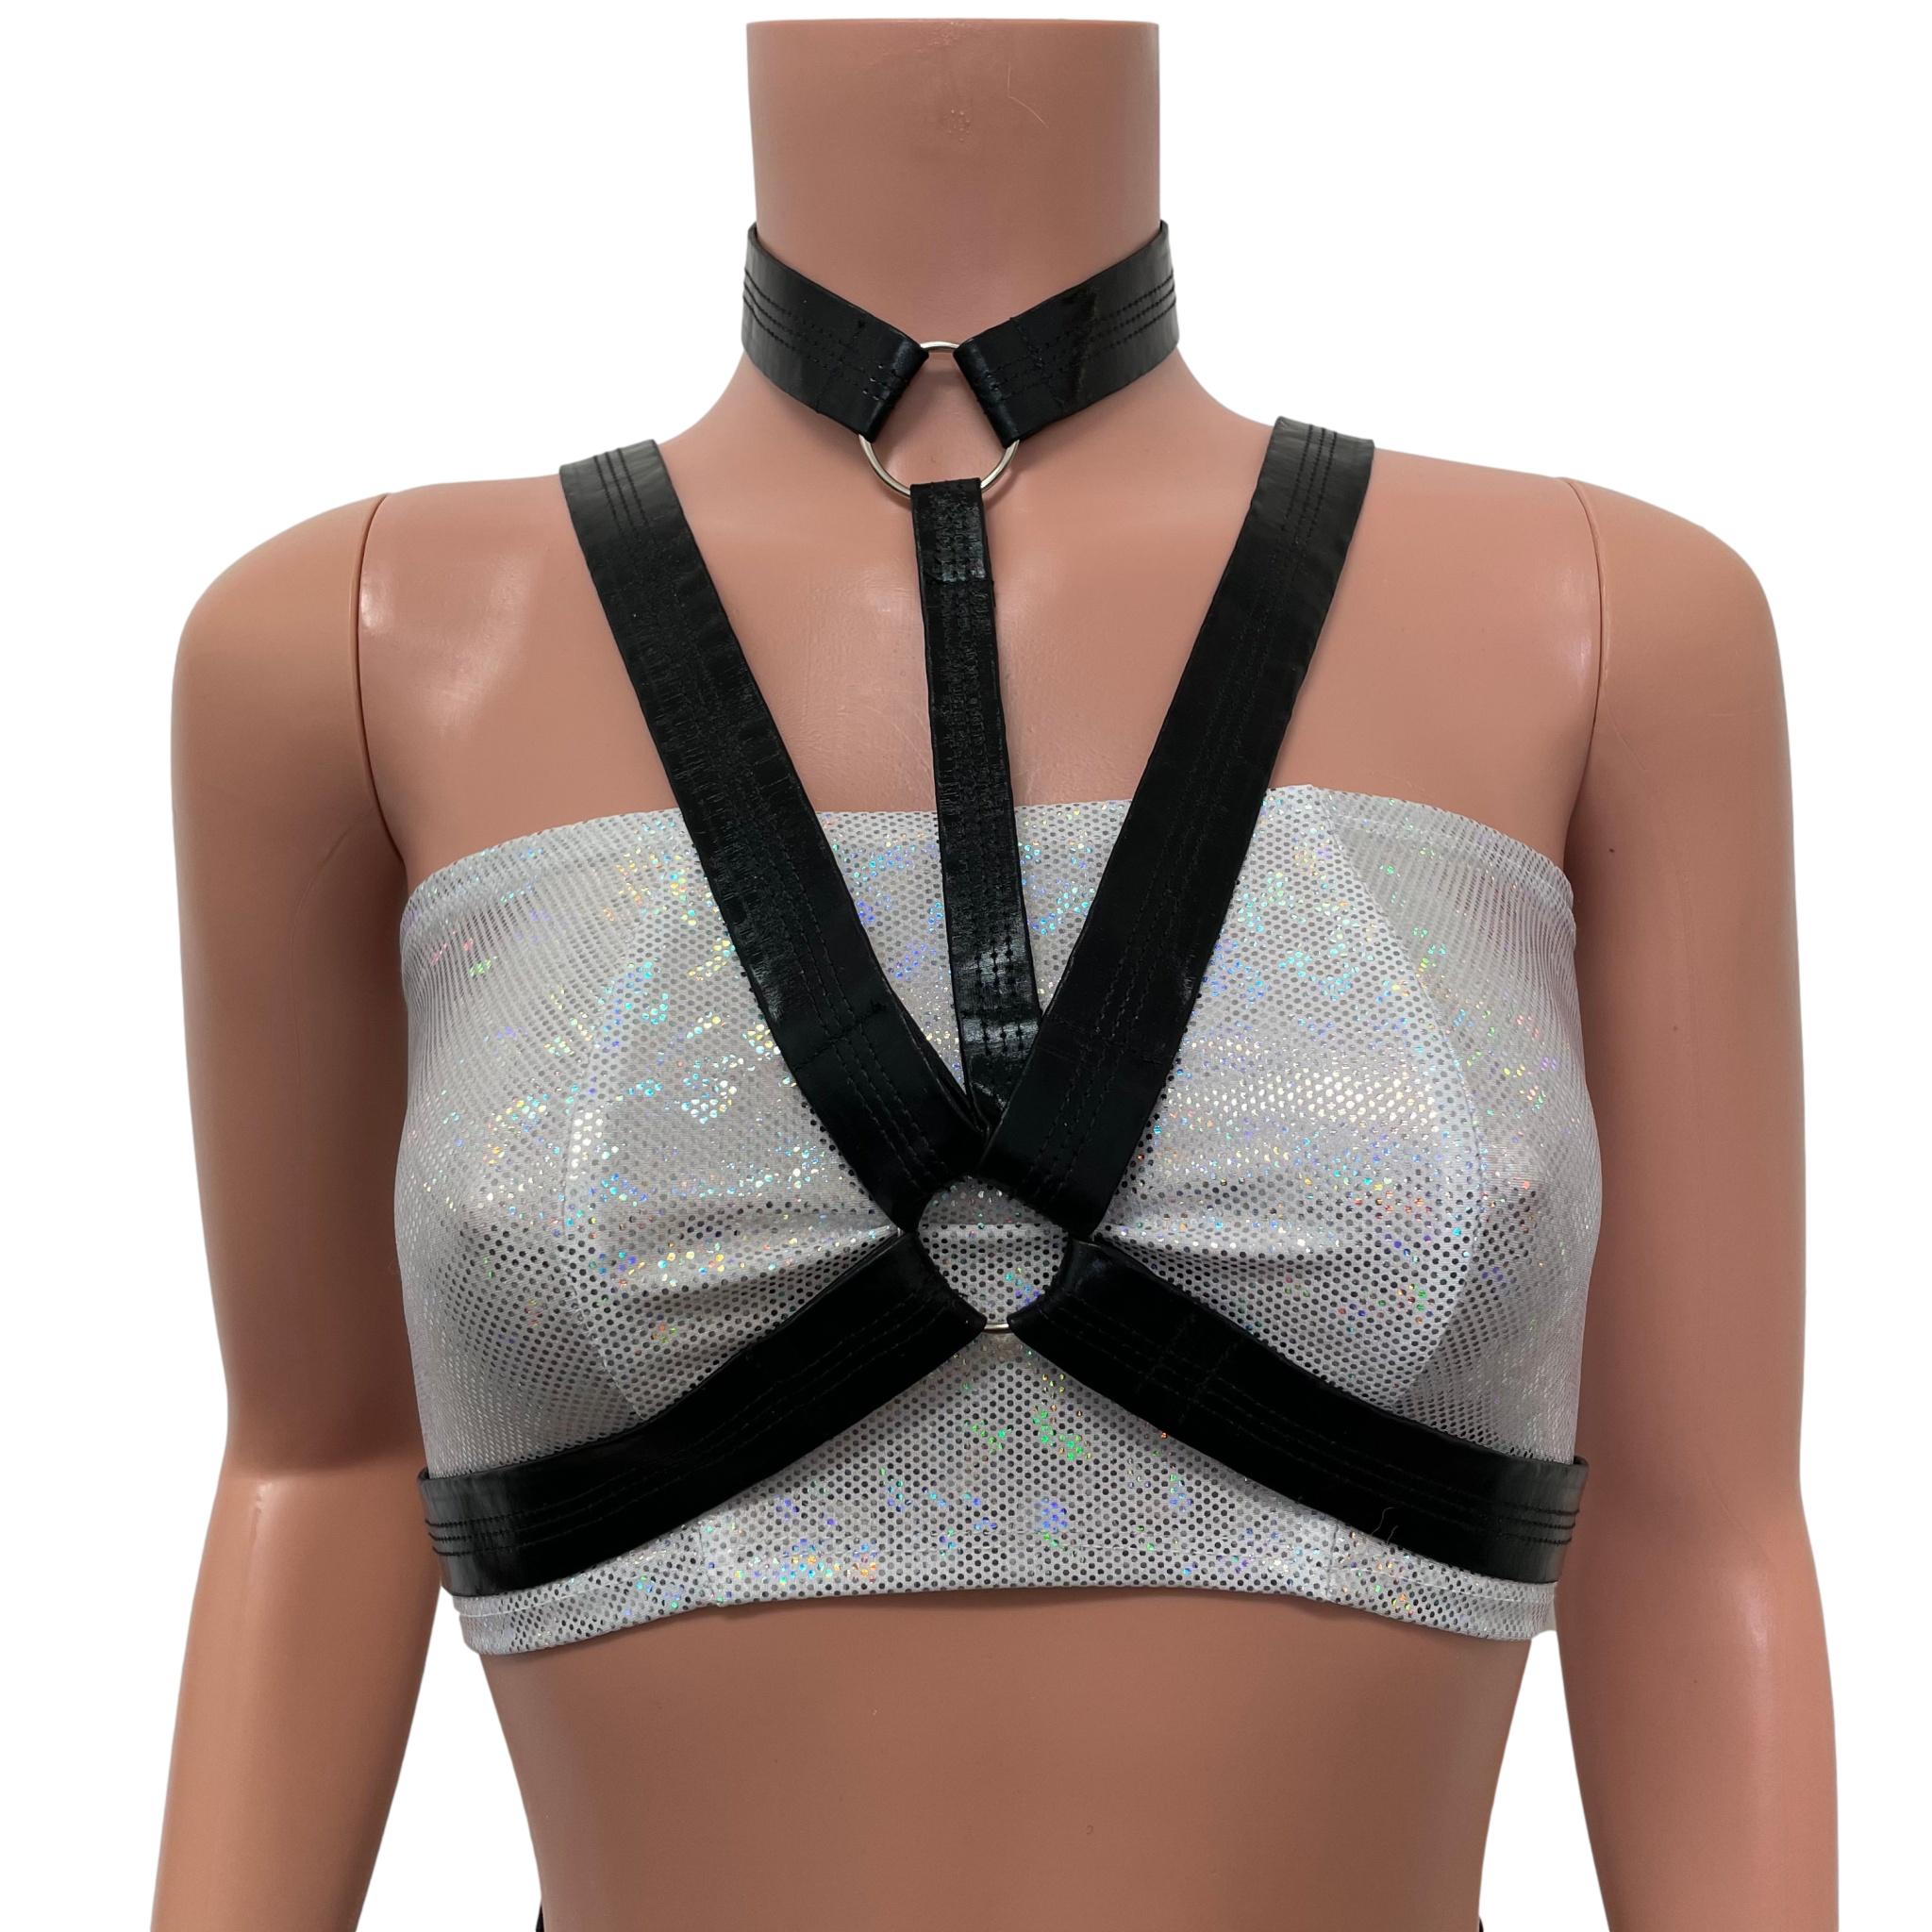 Cage Bra Harness Top in Black Metallic Faux Leather